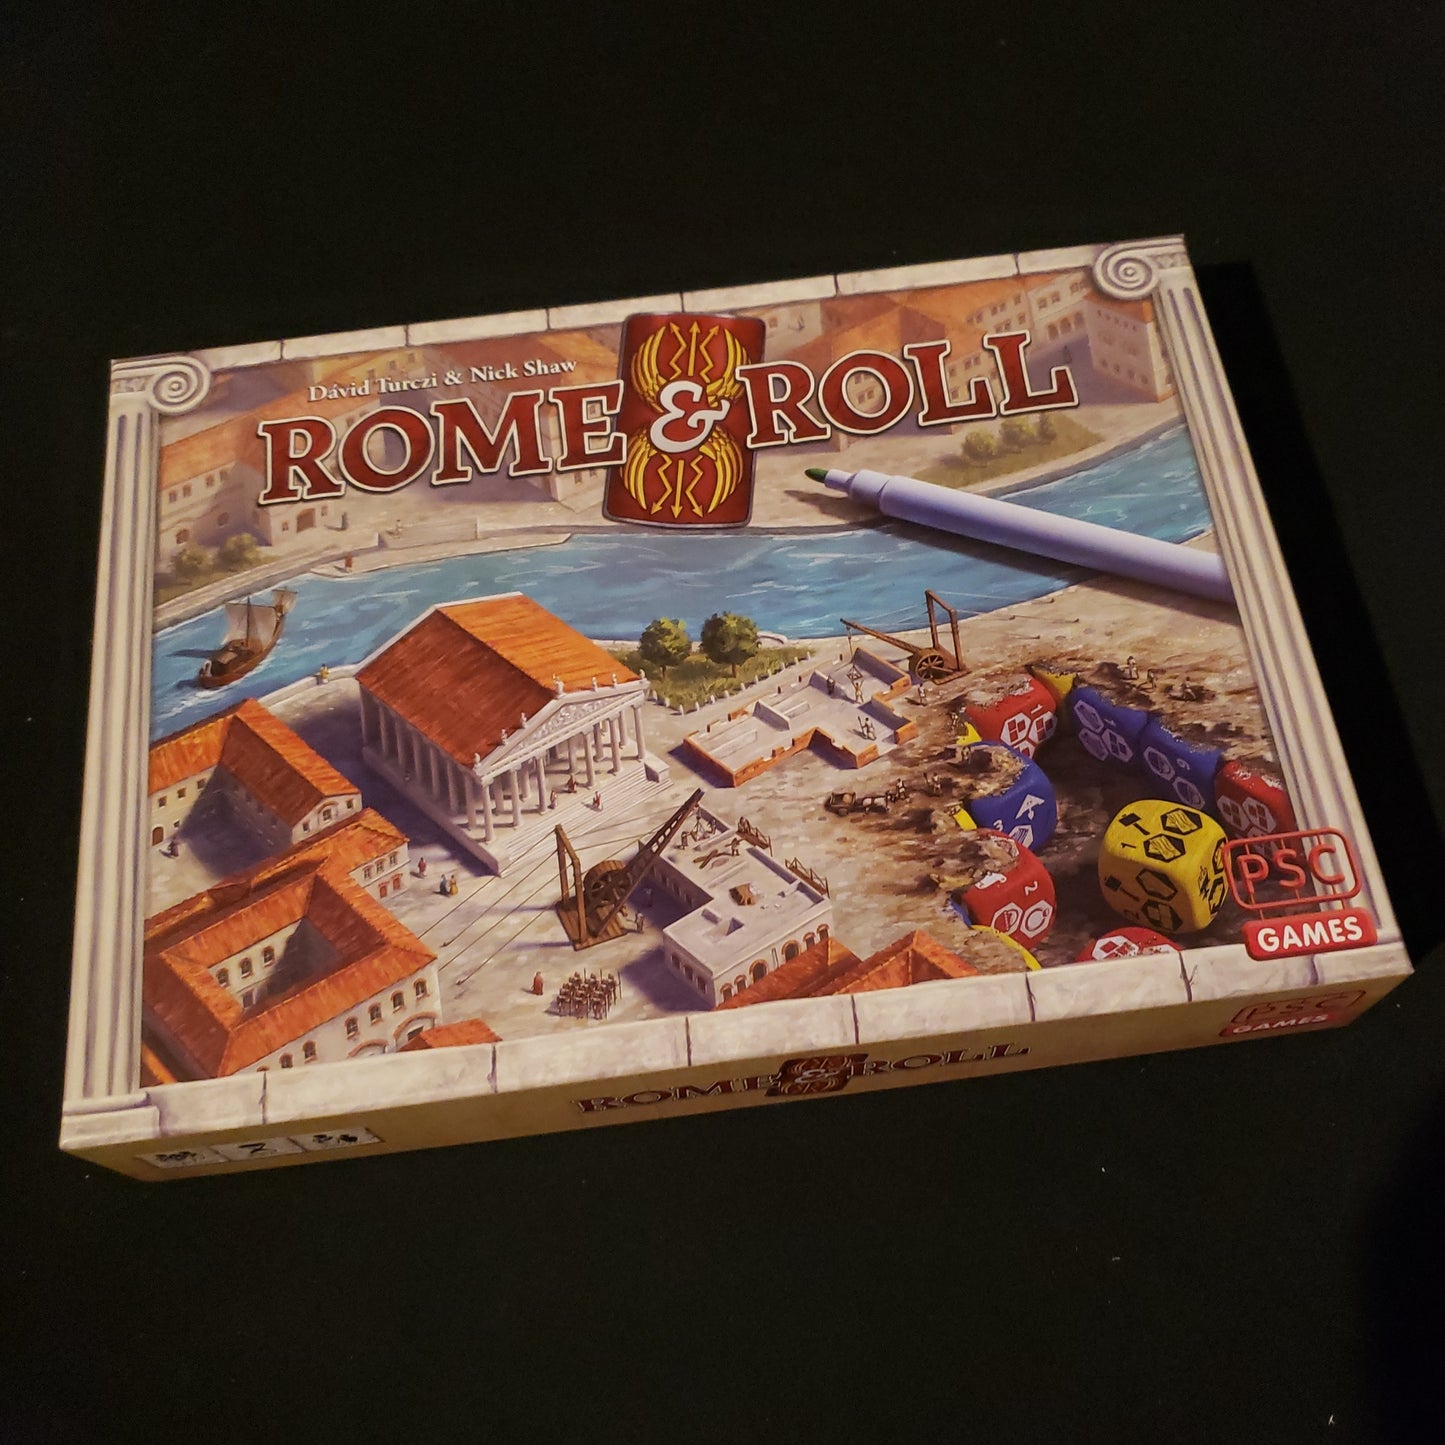 Image shows the front cover of the box of the Rome & Roll board game